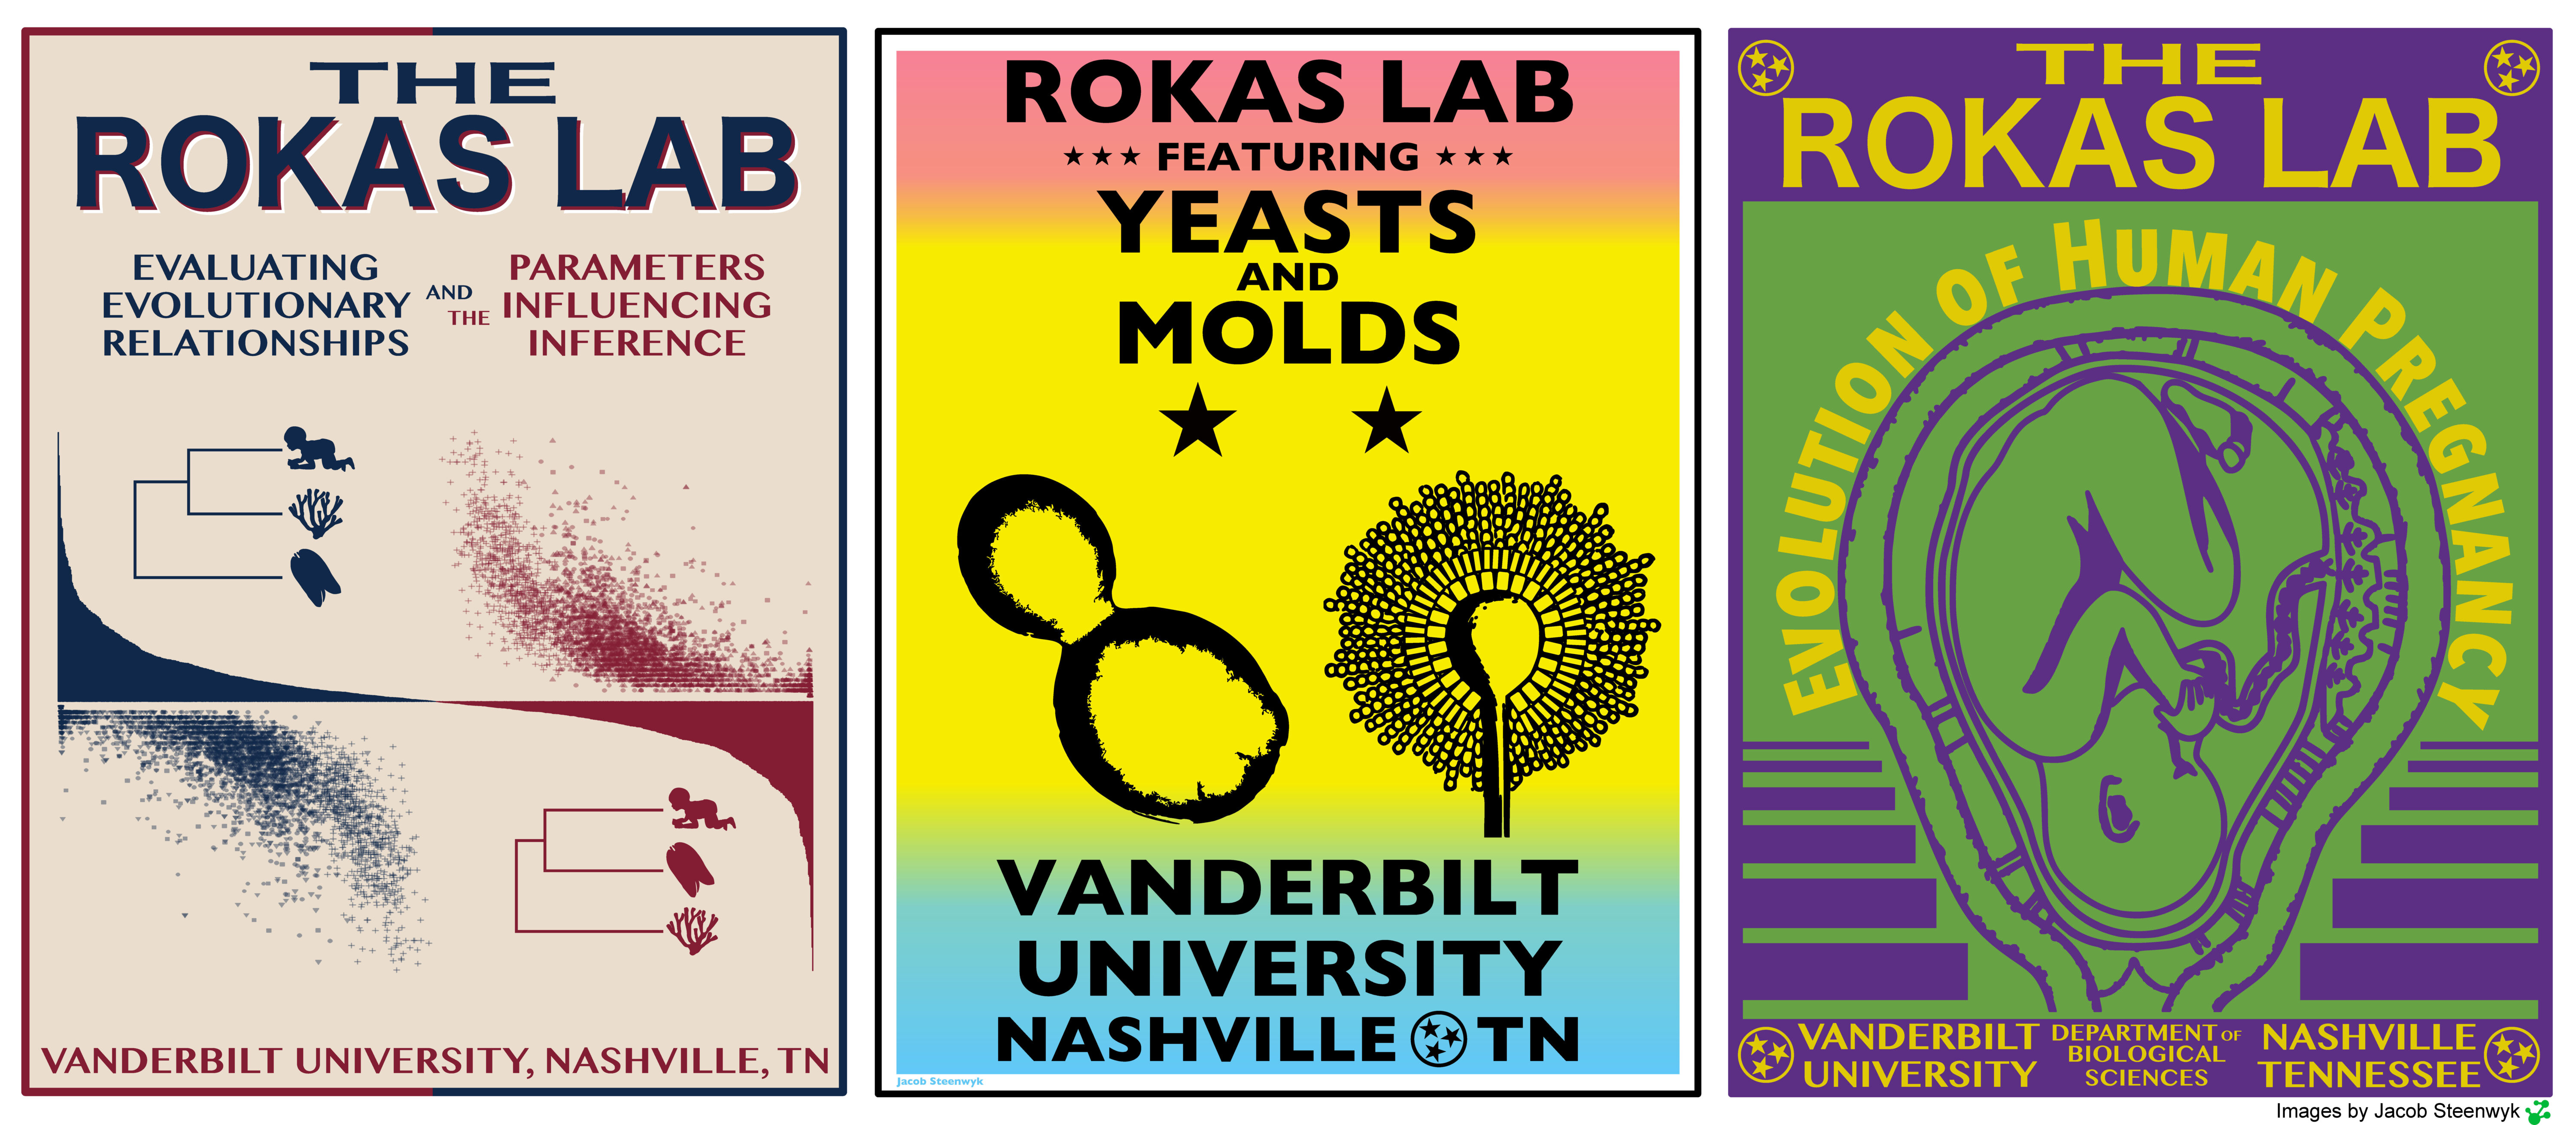 A collage of posters created for the Rokas Lab. Poster 1: tan background, blue and red diagrams showing a bracket connecting an infant, coral, and jellyfish and text saying "The Rokas Lab: Evaluating Evolutionary Relationships and the Parameters Influencing Inference, Vanderbilt University, Nashville, TN"; Poster 2: a pink, yellow, and blue background with black graphics of yeasts and molds and text saying "Rokas Lab: Featuring Yeast and Molds, Vanderbilt University, Nashville, TN"; Poster 3: a green and purple background with a graphic of a fetus inside a uterus and text saying "The Rokas Lab: Evolution of Human Pregnancy, Vanderbilt University Department of Biological Sciences, Nashville, Tennessee."